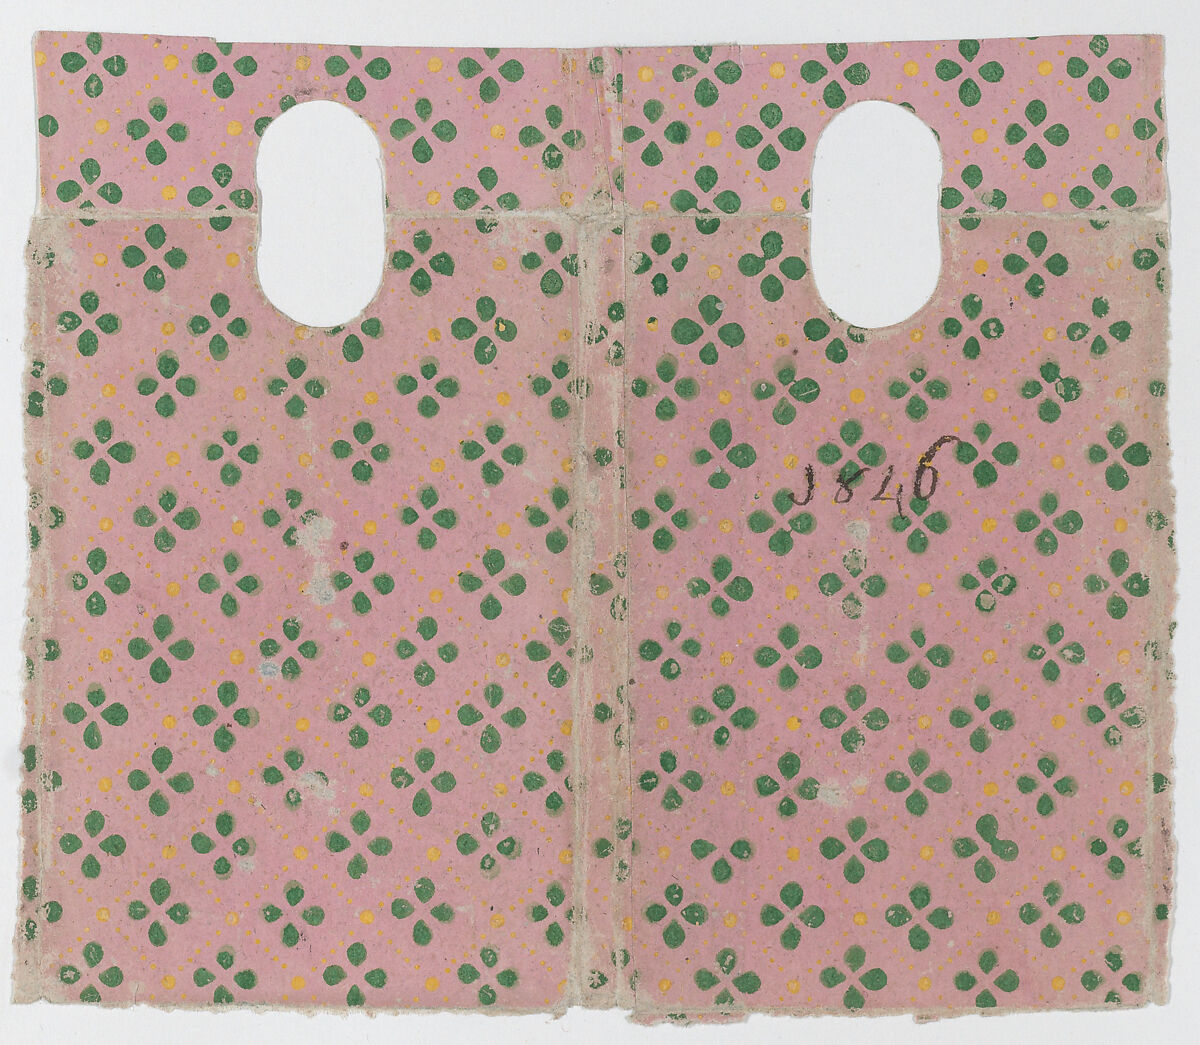 Sheet with an overall floral and dot pattern, Anonymous  , Italian, late 18th-mid 19th century, Relief print (wood or metal) 